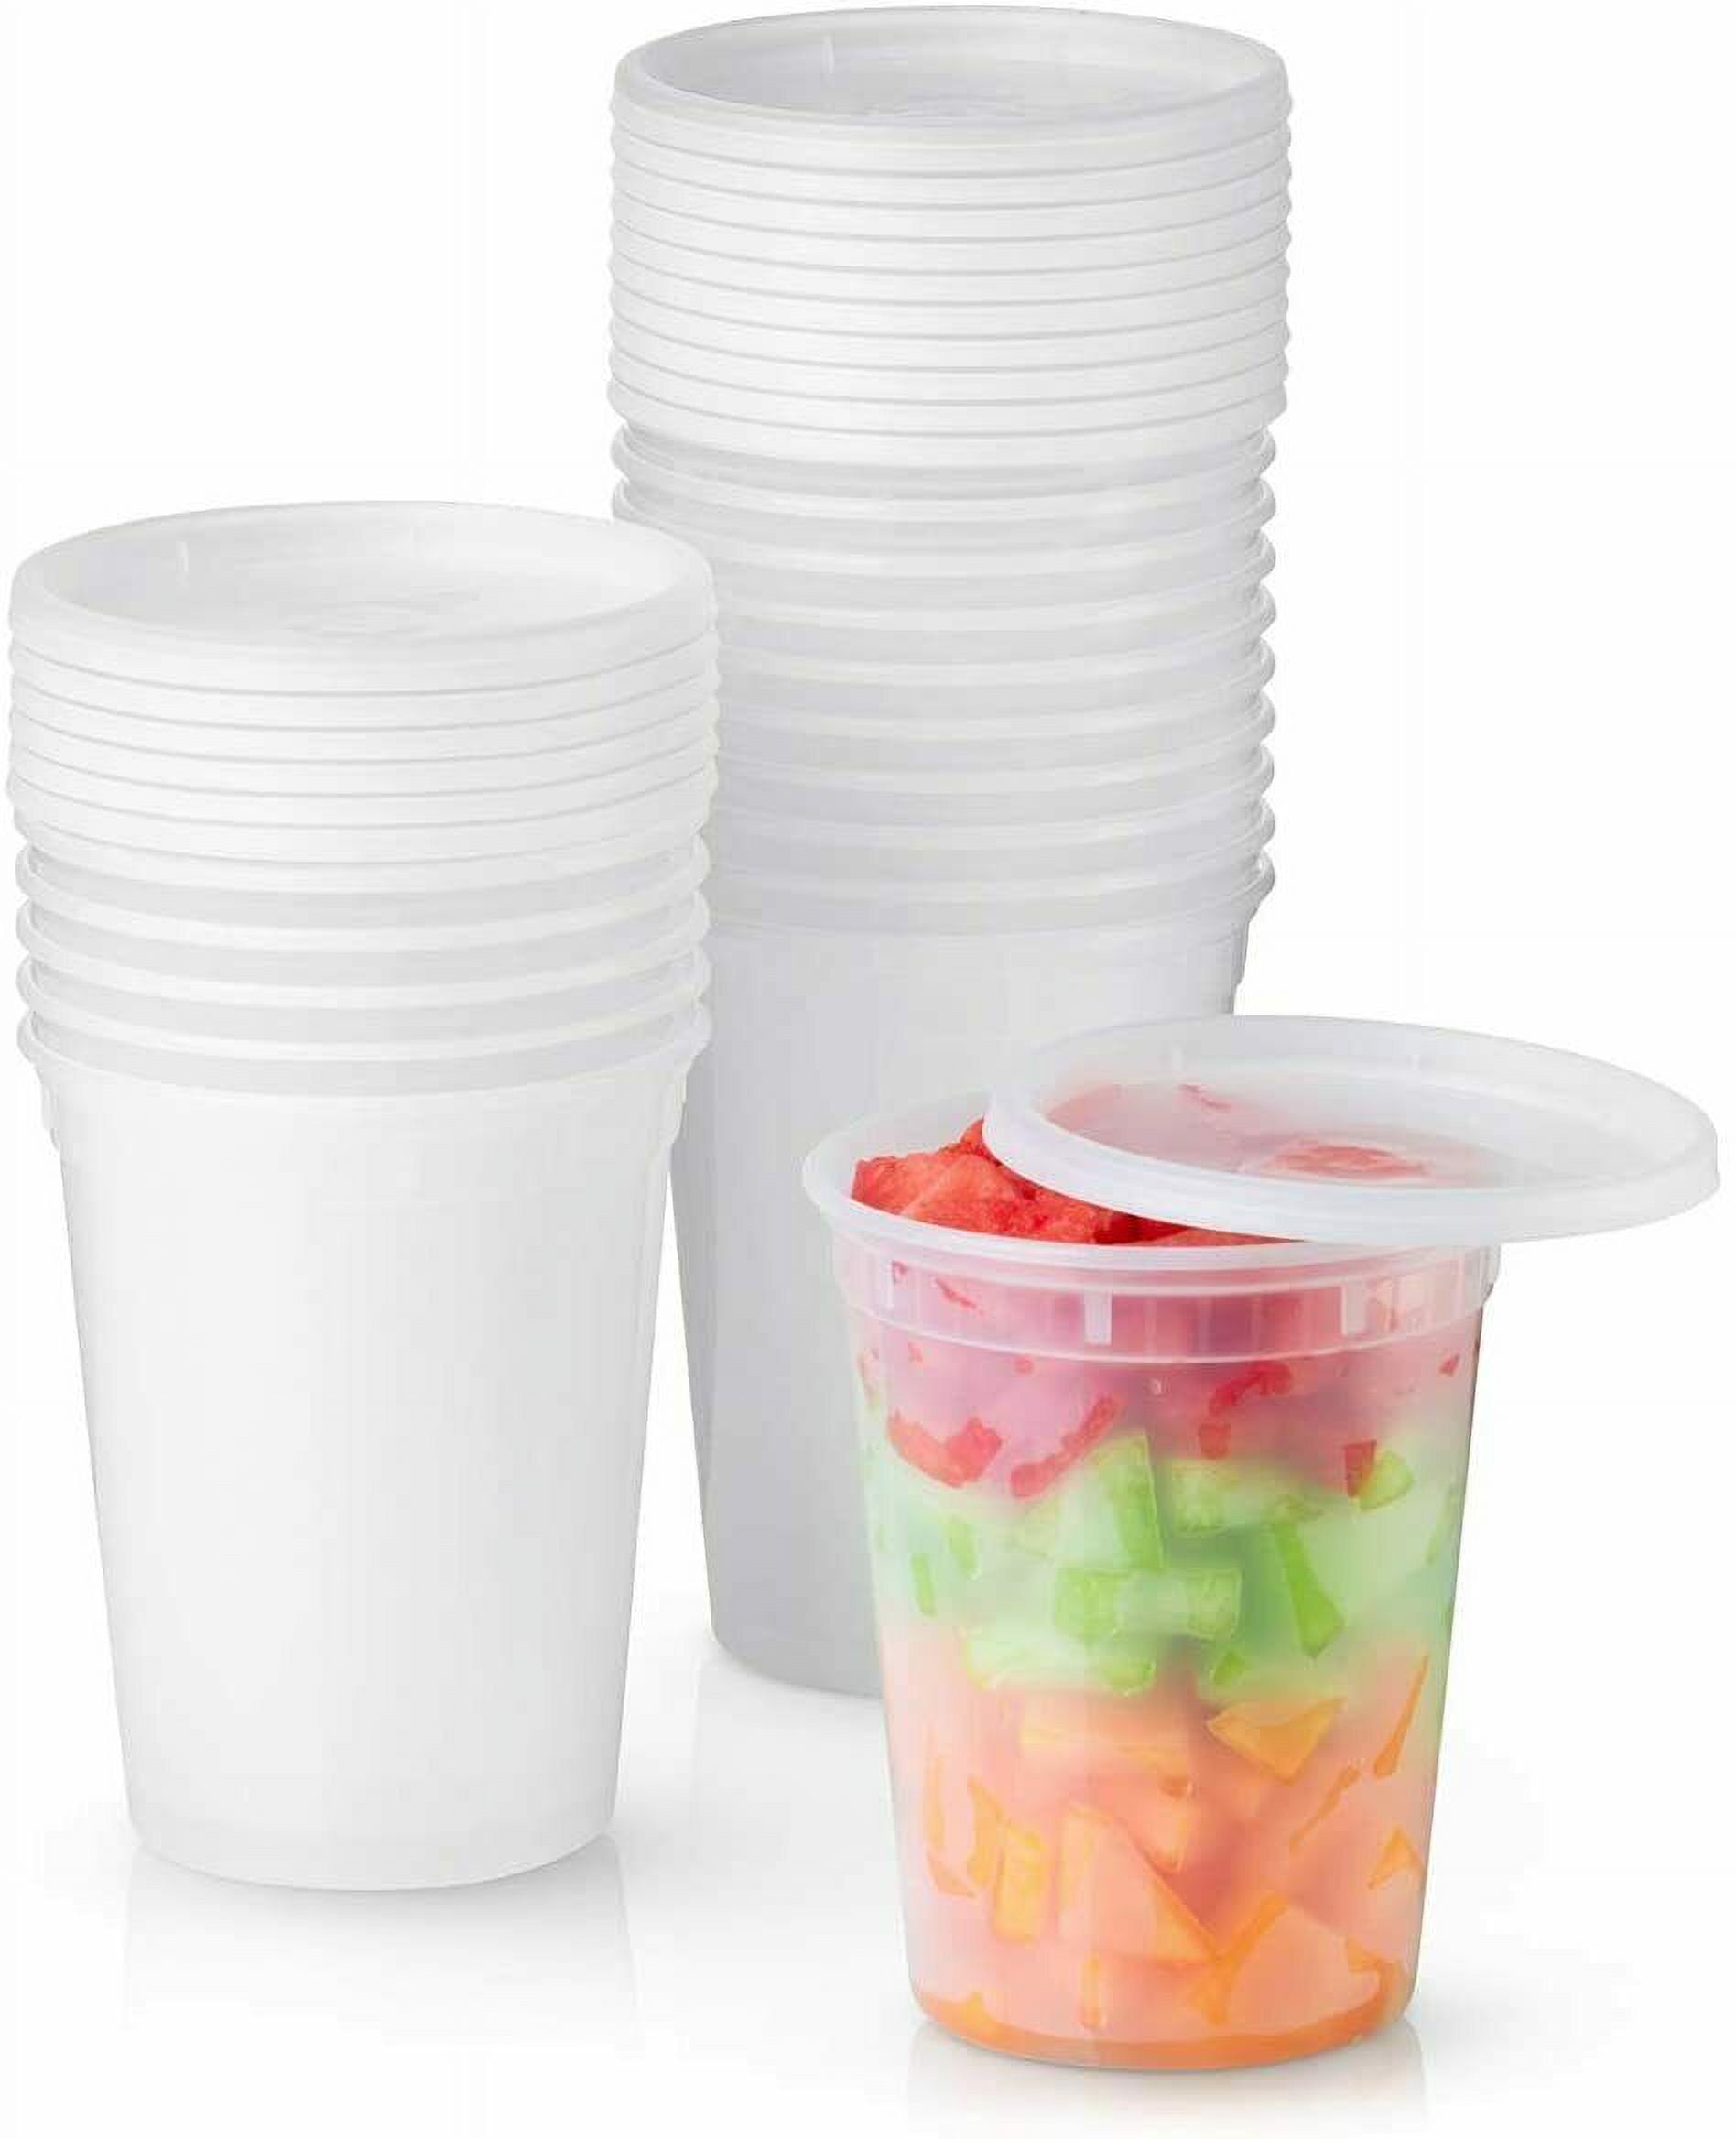 Yw YSD-2532-12 Plastic Soup Food Container with Lids 12, 32 oz